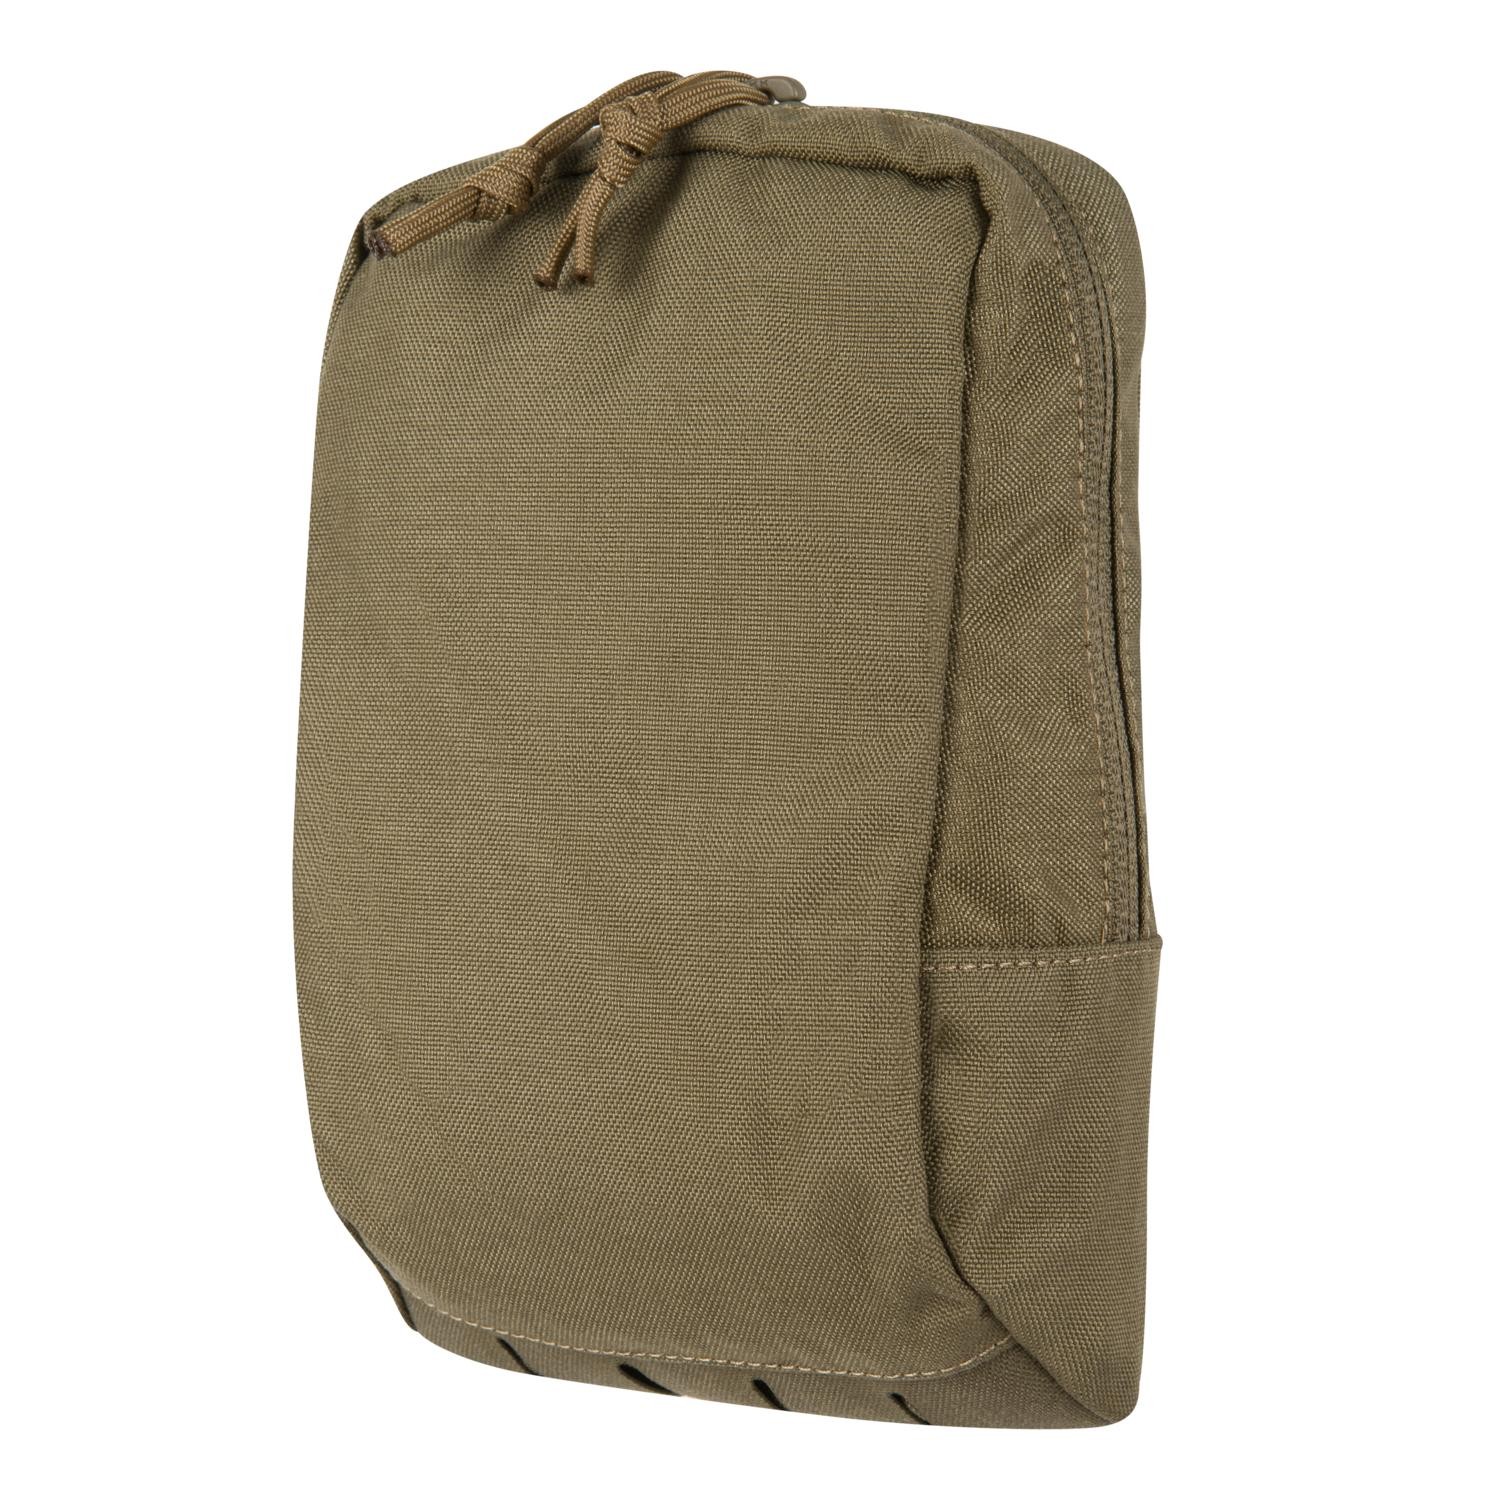 UTILITY POUCH MEDIUM - DIRECT ACTION